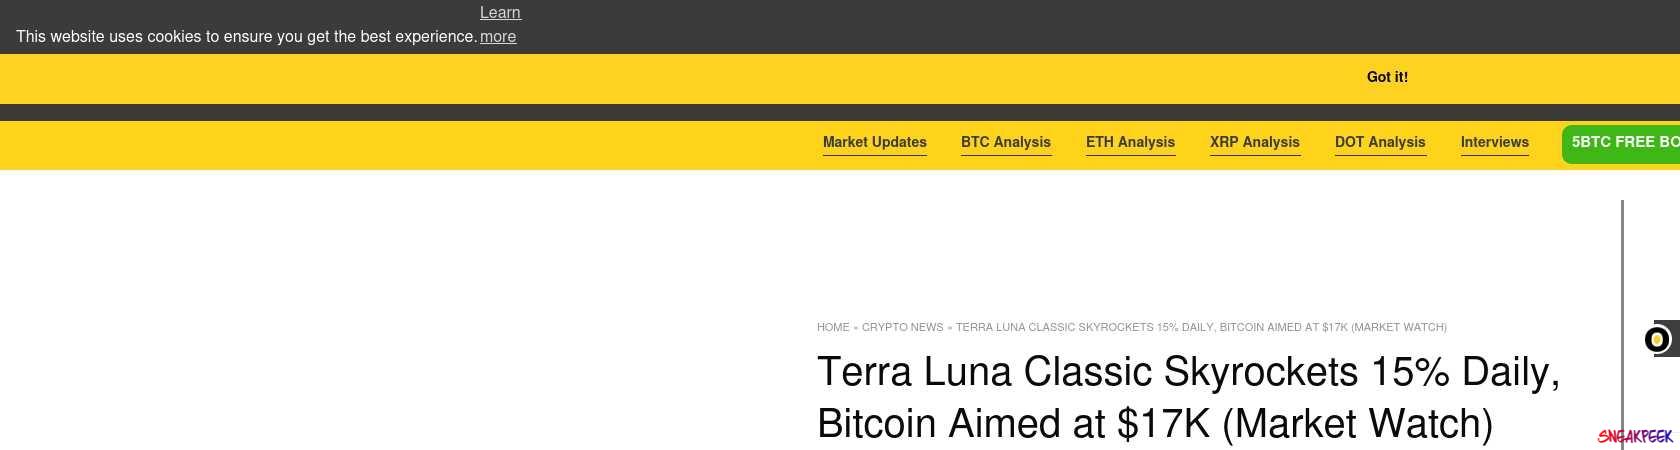 Read the full Article:  ⭲ Terra Luna Classic Skyrockets 15% Daily, Bitcoin Aimed at $17K (Market Watch)